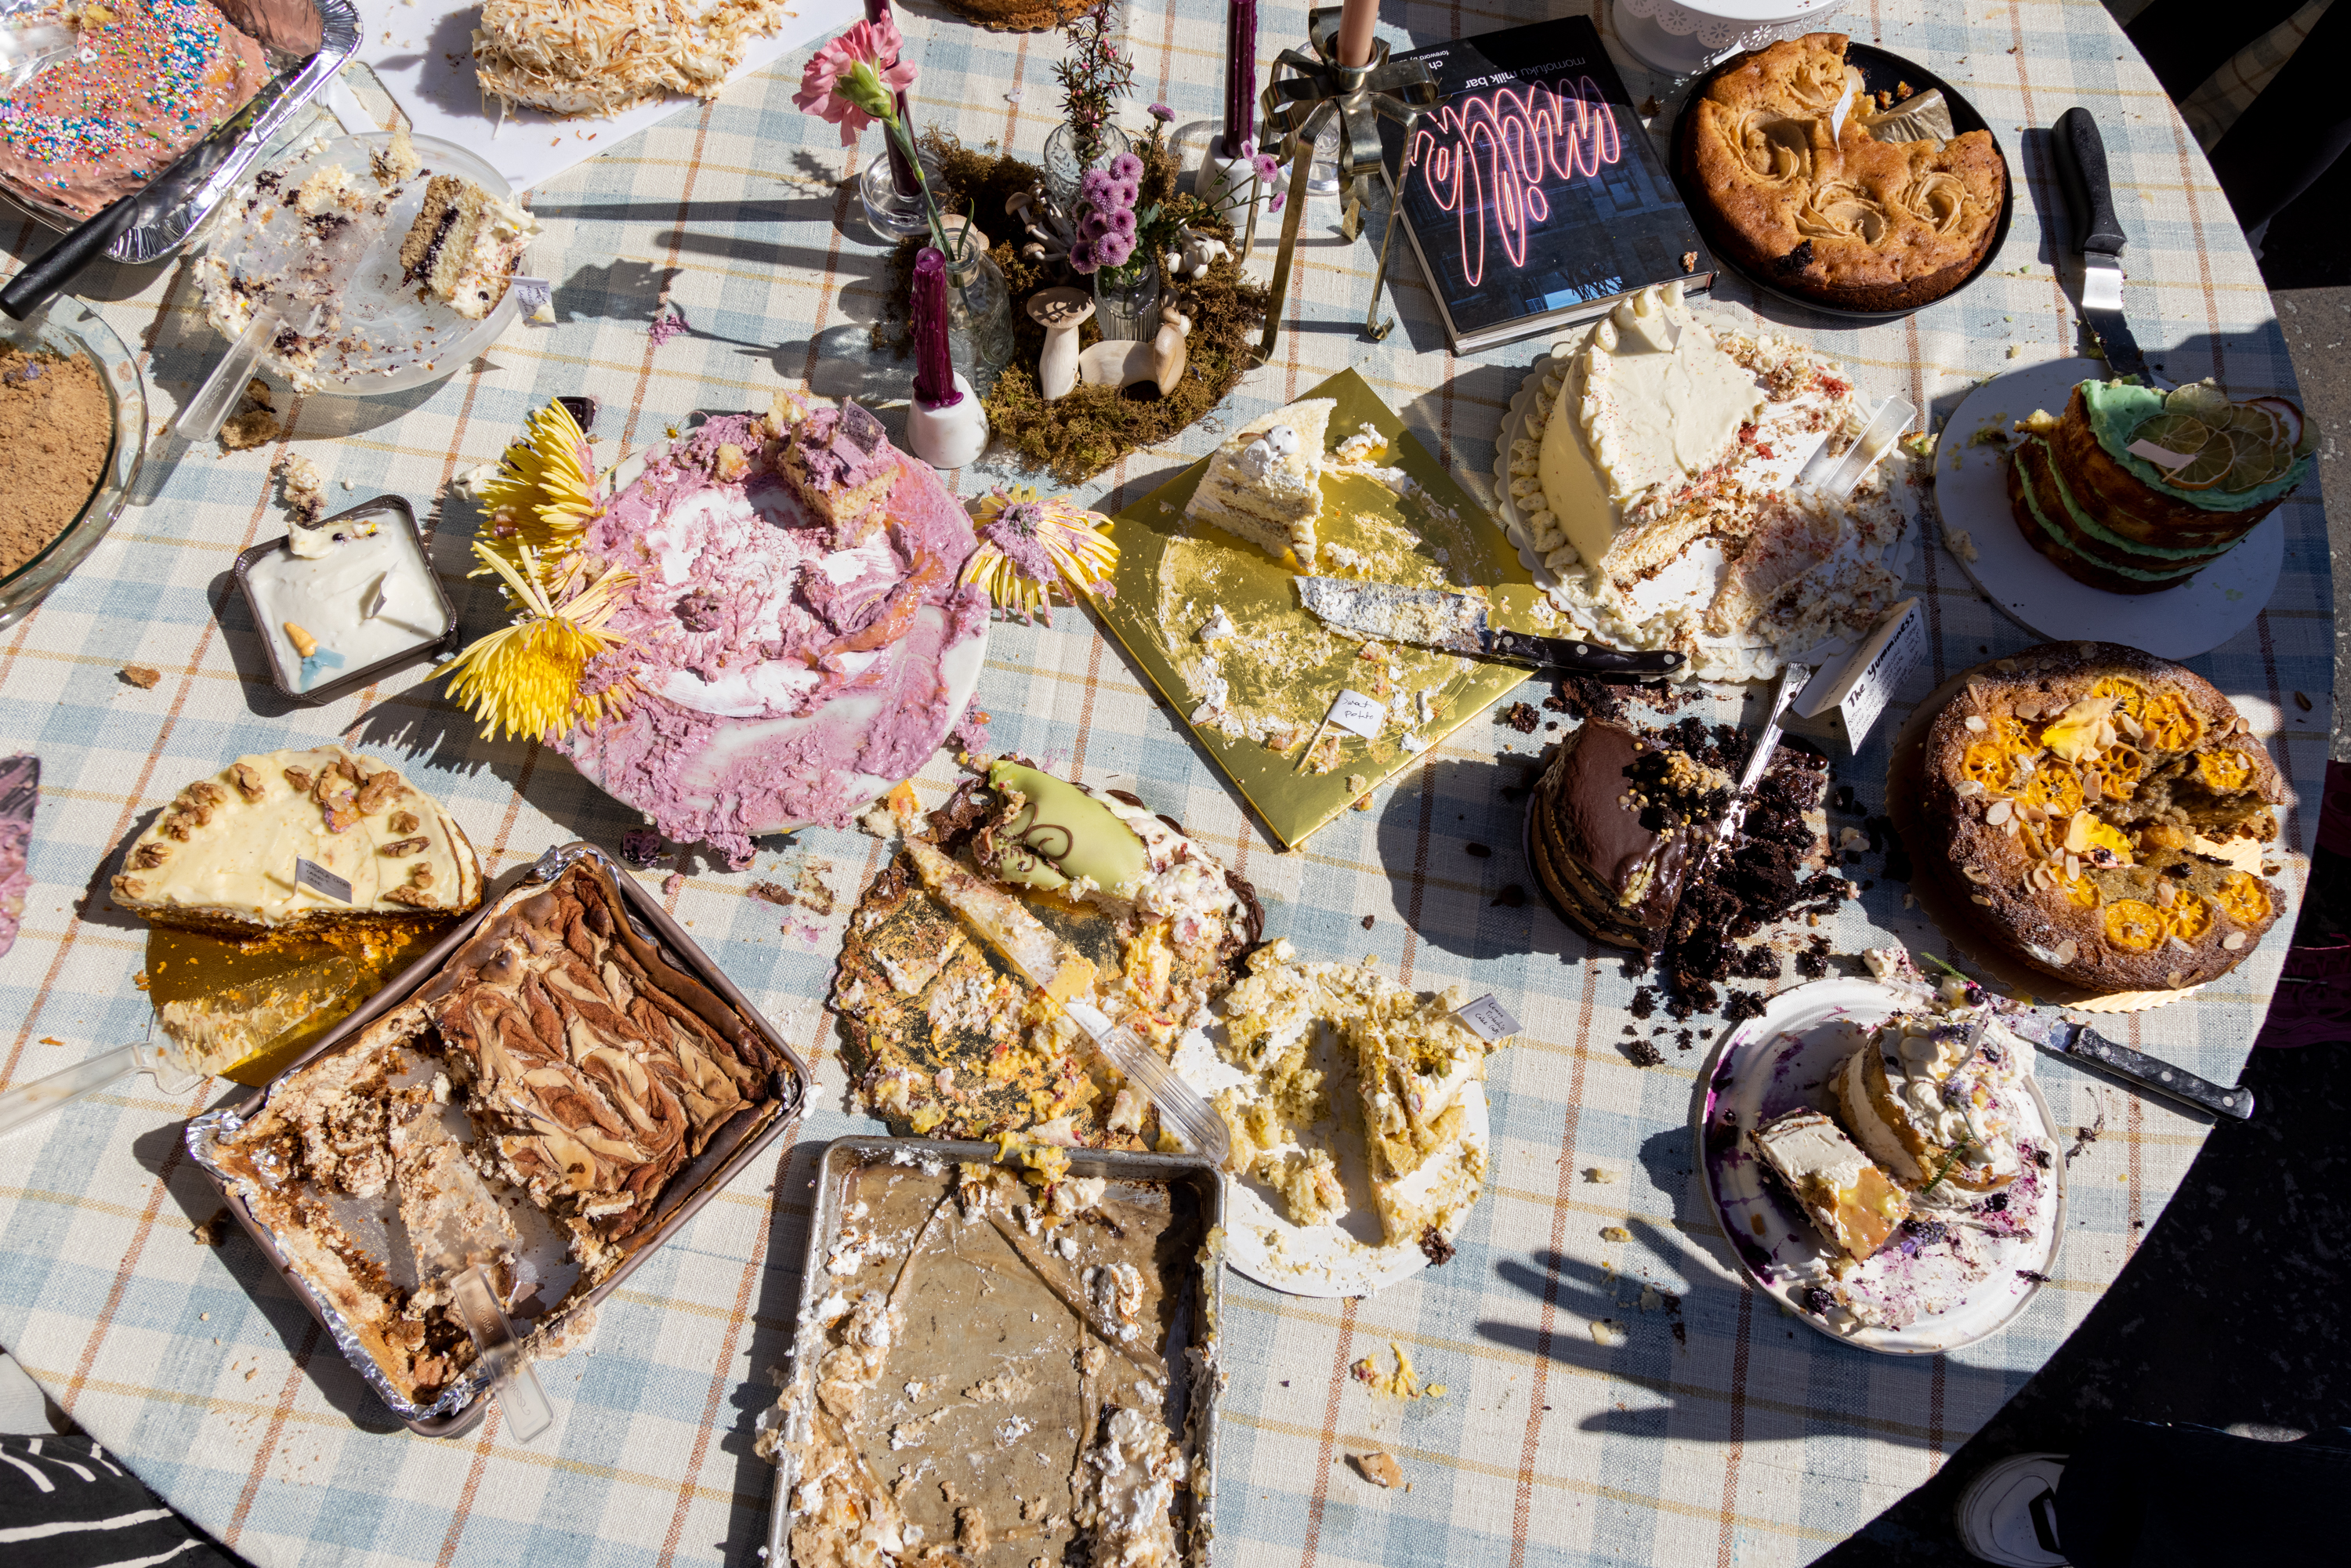 A table with various half-eaten cakes and pies, adorned with flowers and a &quot;Yum&quot; sign, in bright daylight.